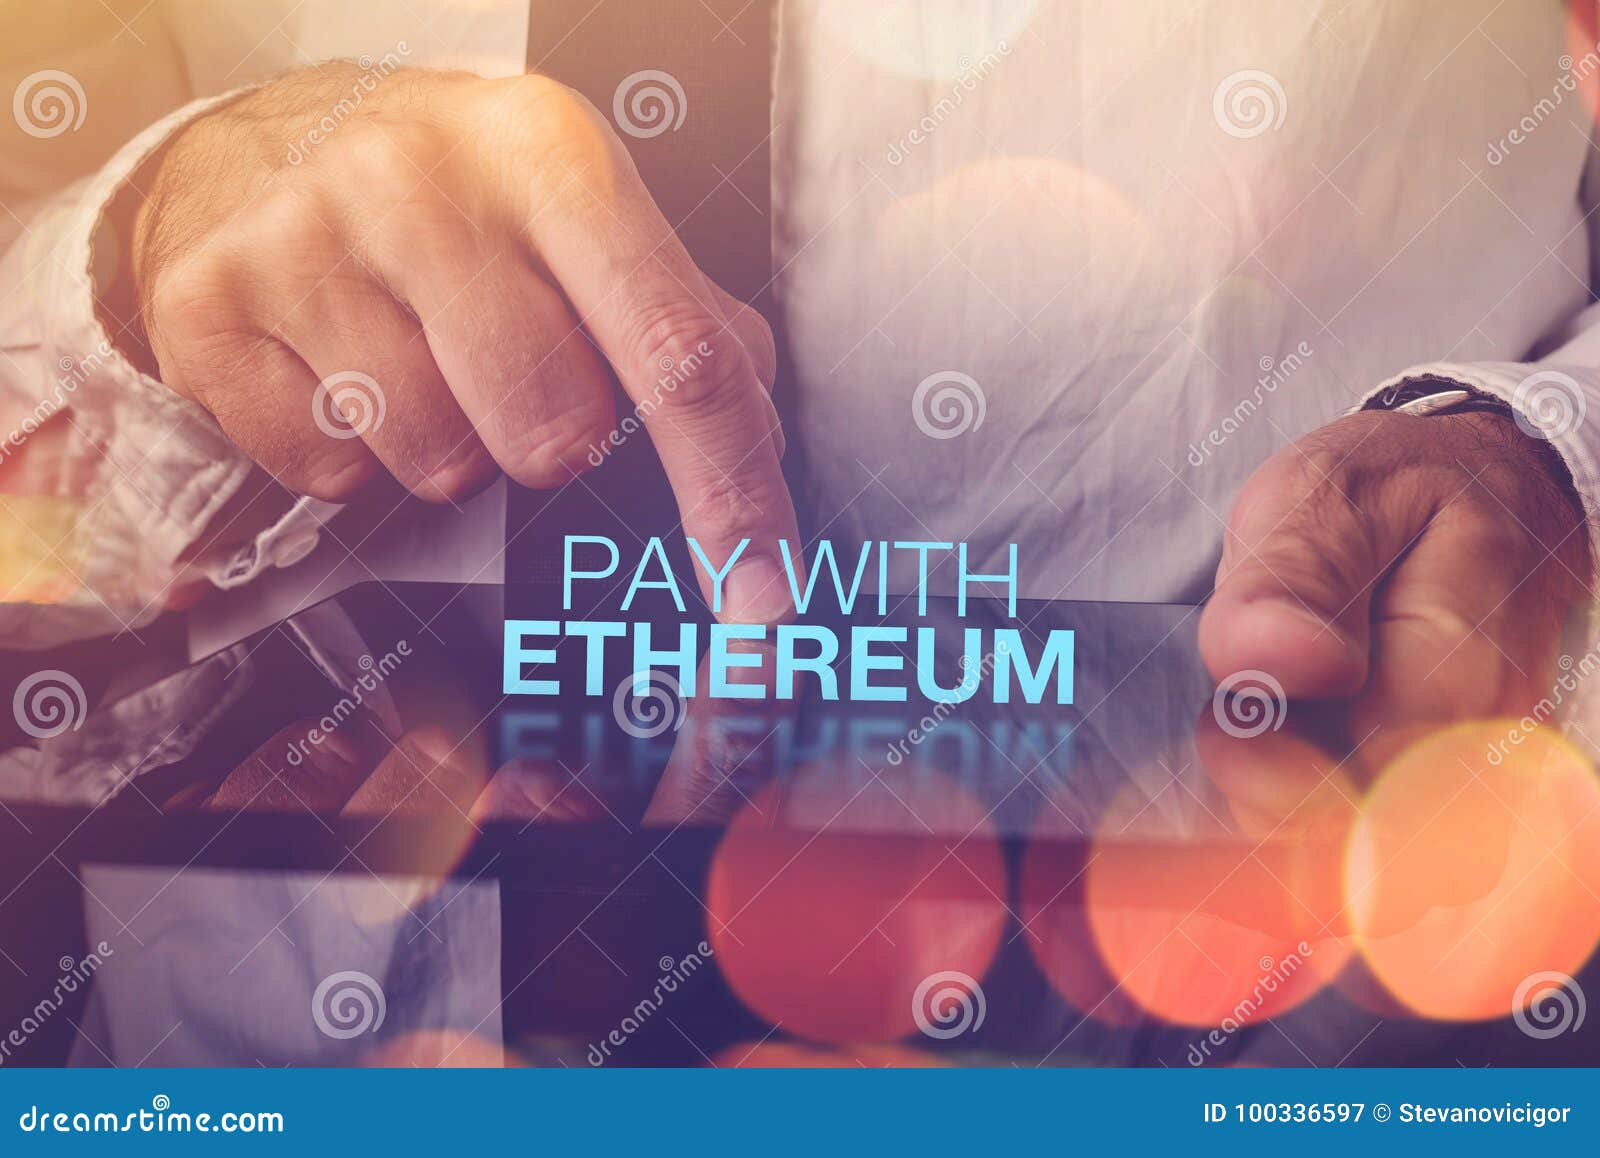 pay by ethereum